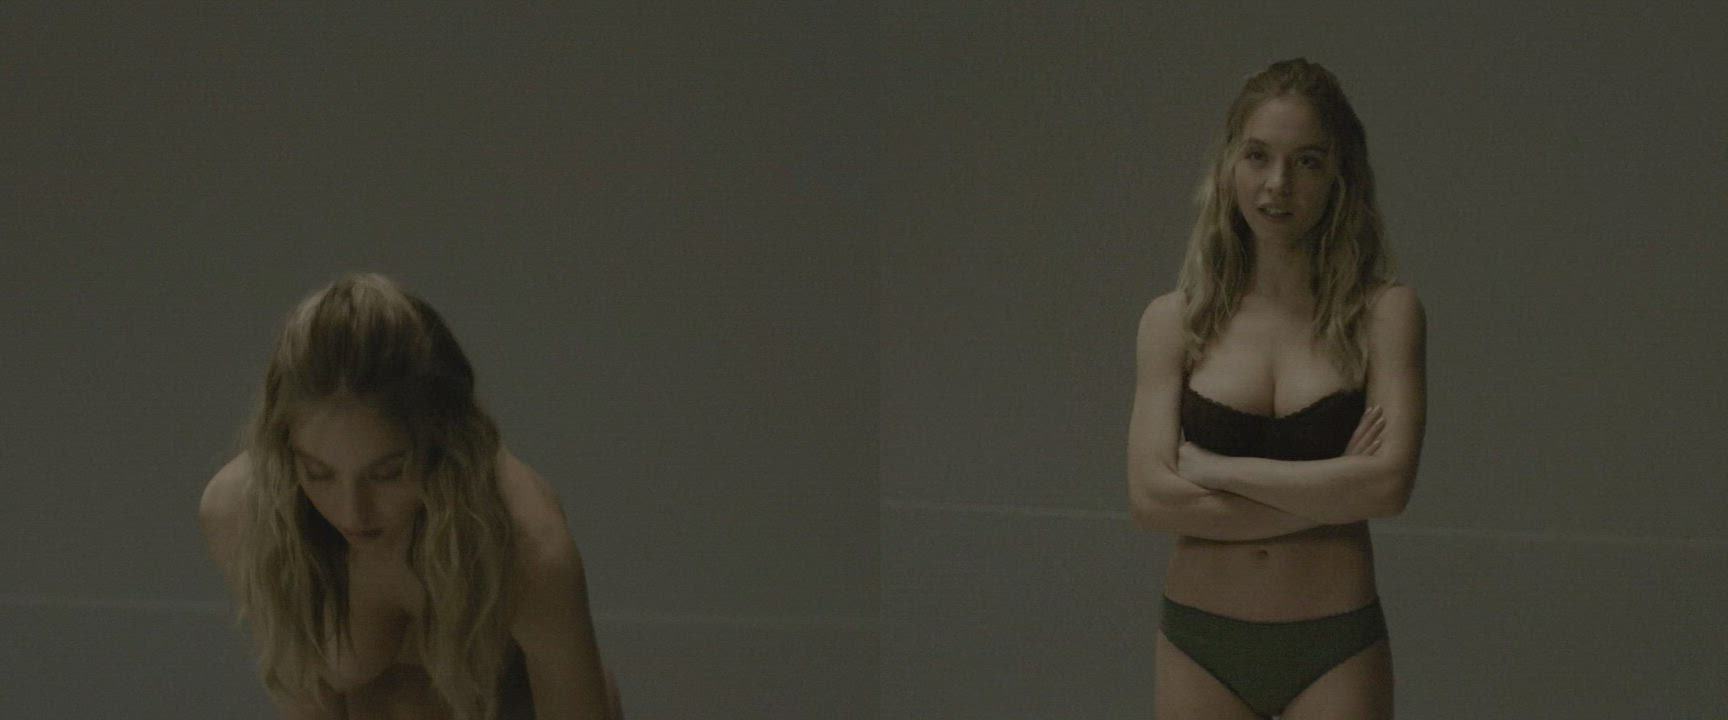 Sydney Sweeney unleashed her big, natural tits again in her new movie (on/off)